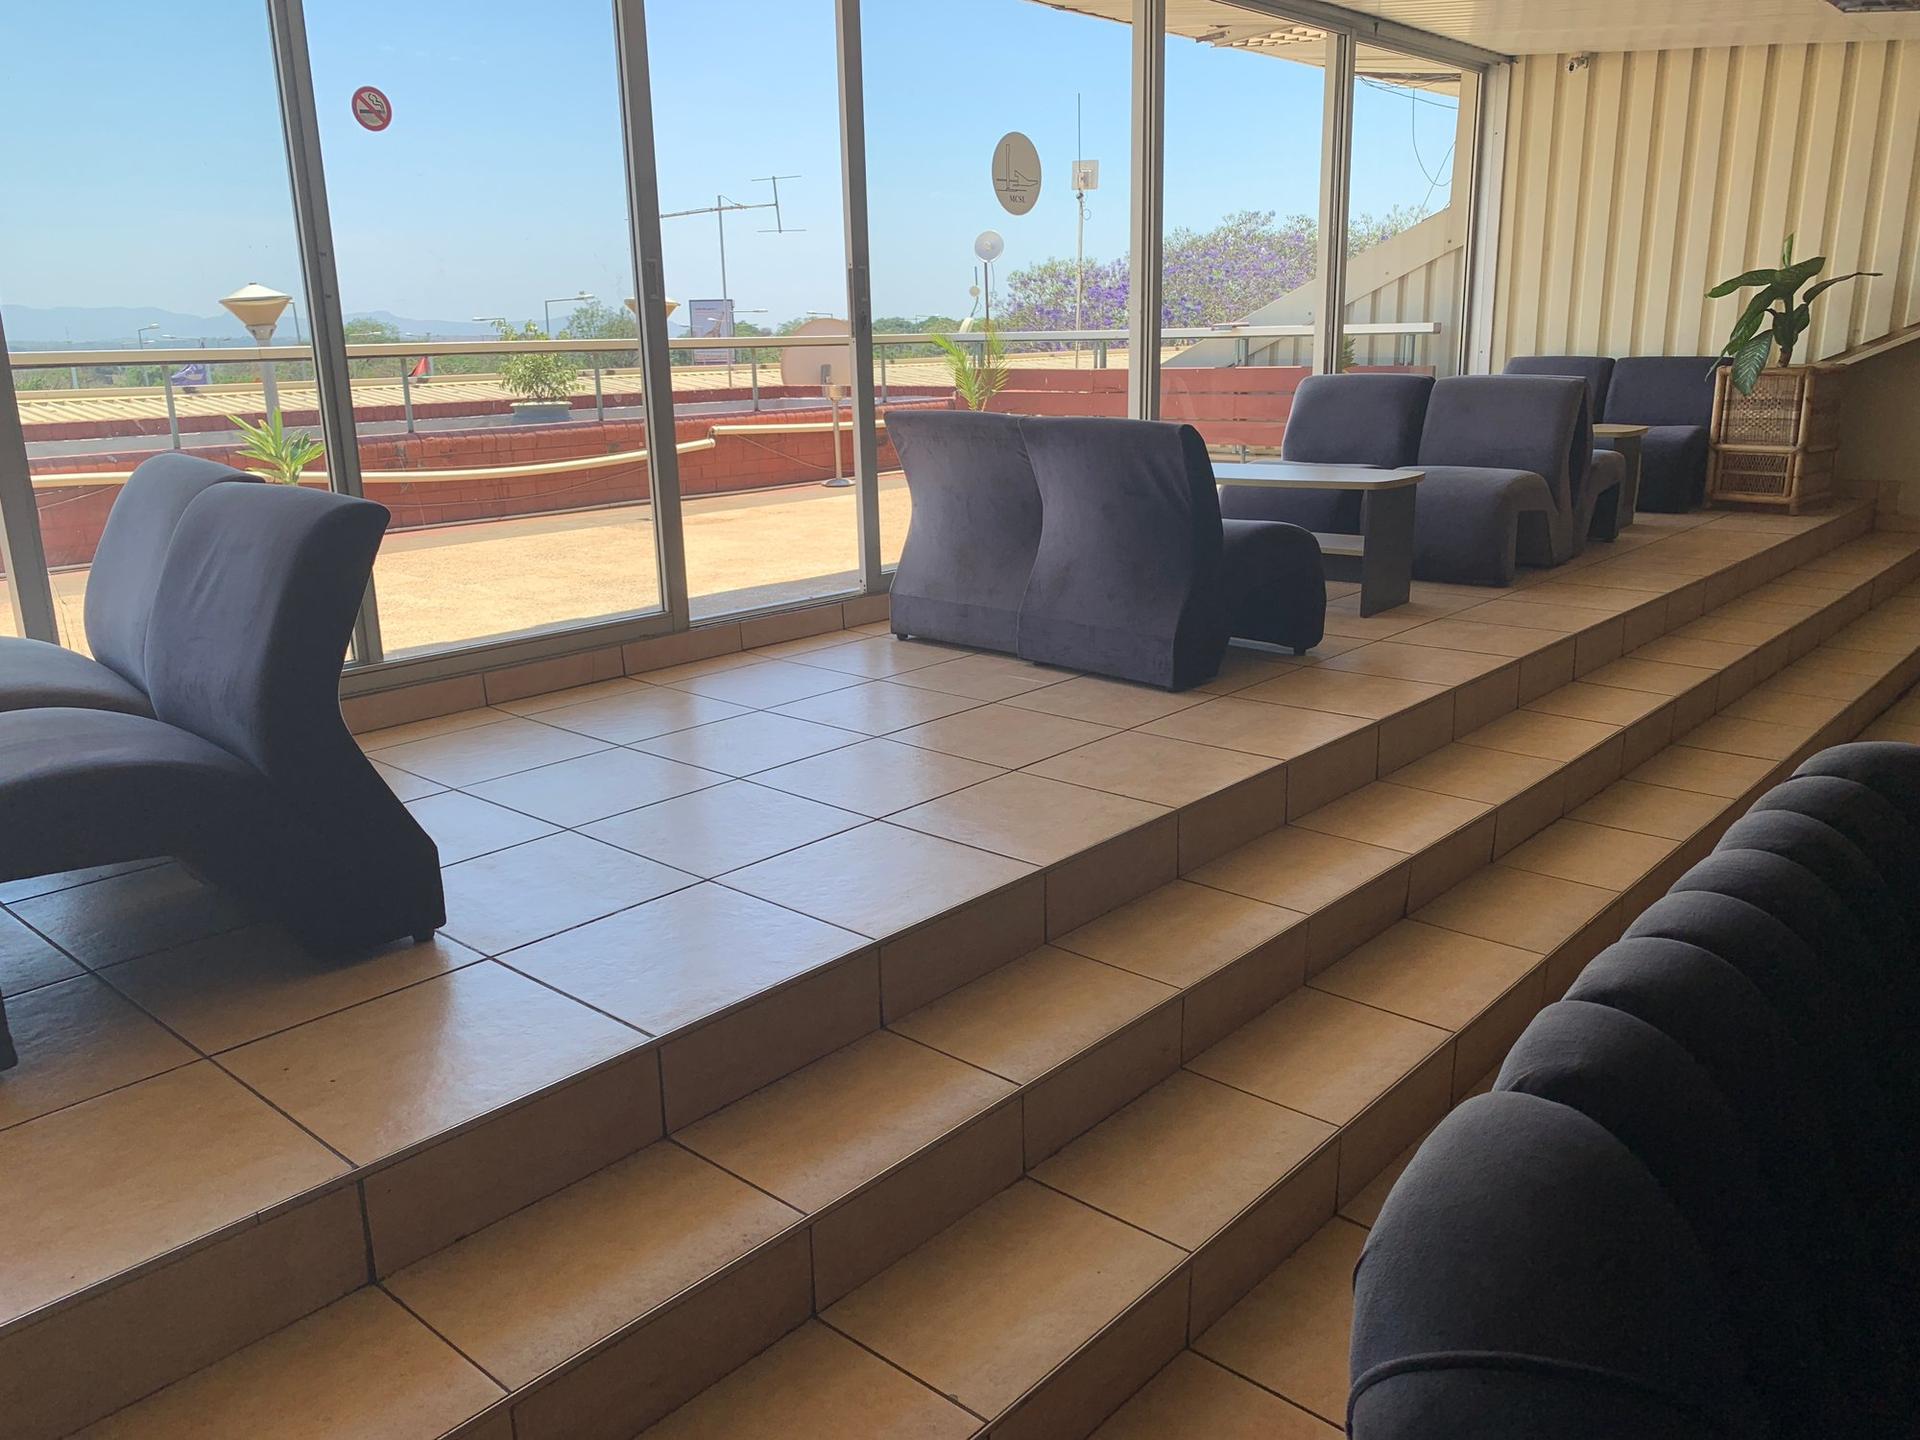 Ndege Business Class Lounge image 2 of 4